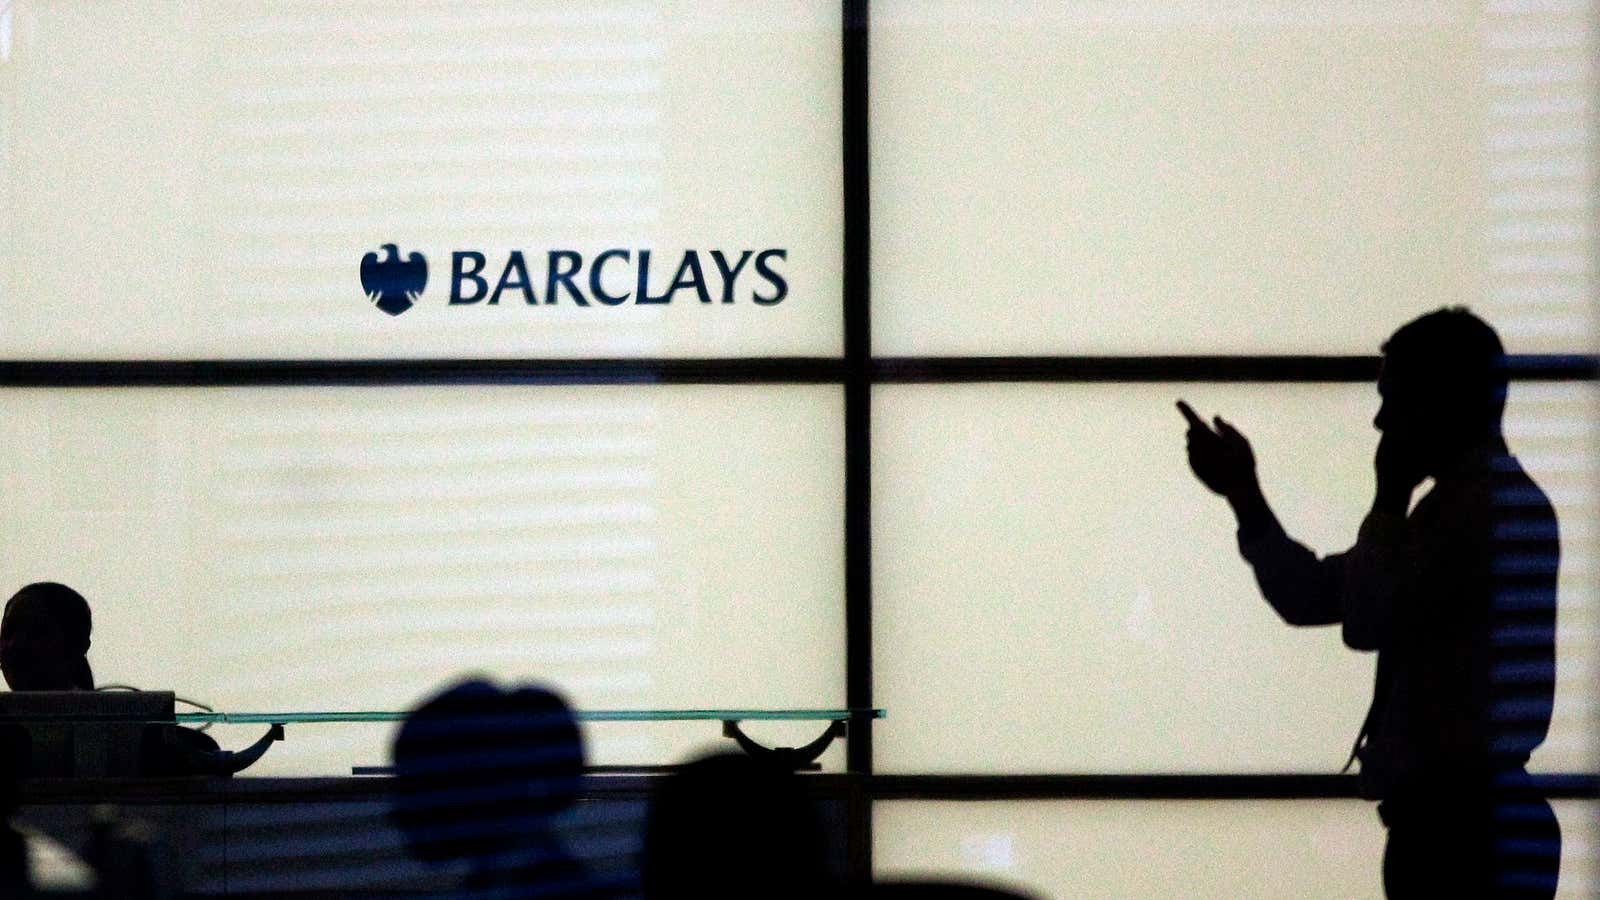 The upper echelons of Barclays management are bracing for cuts.